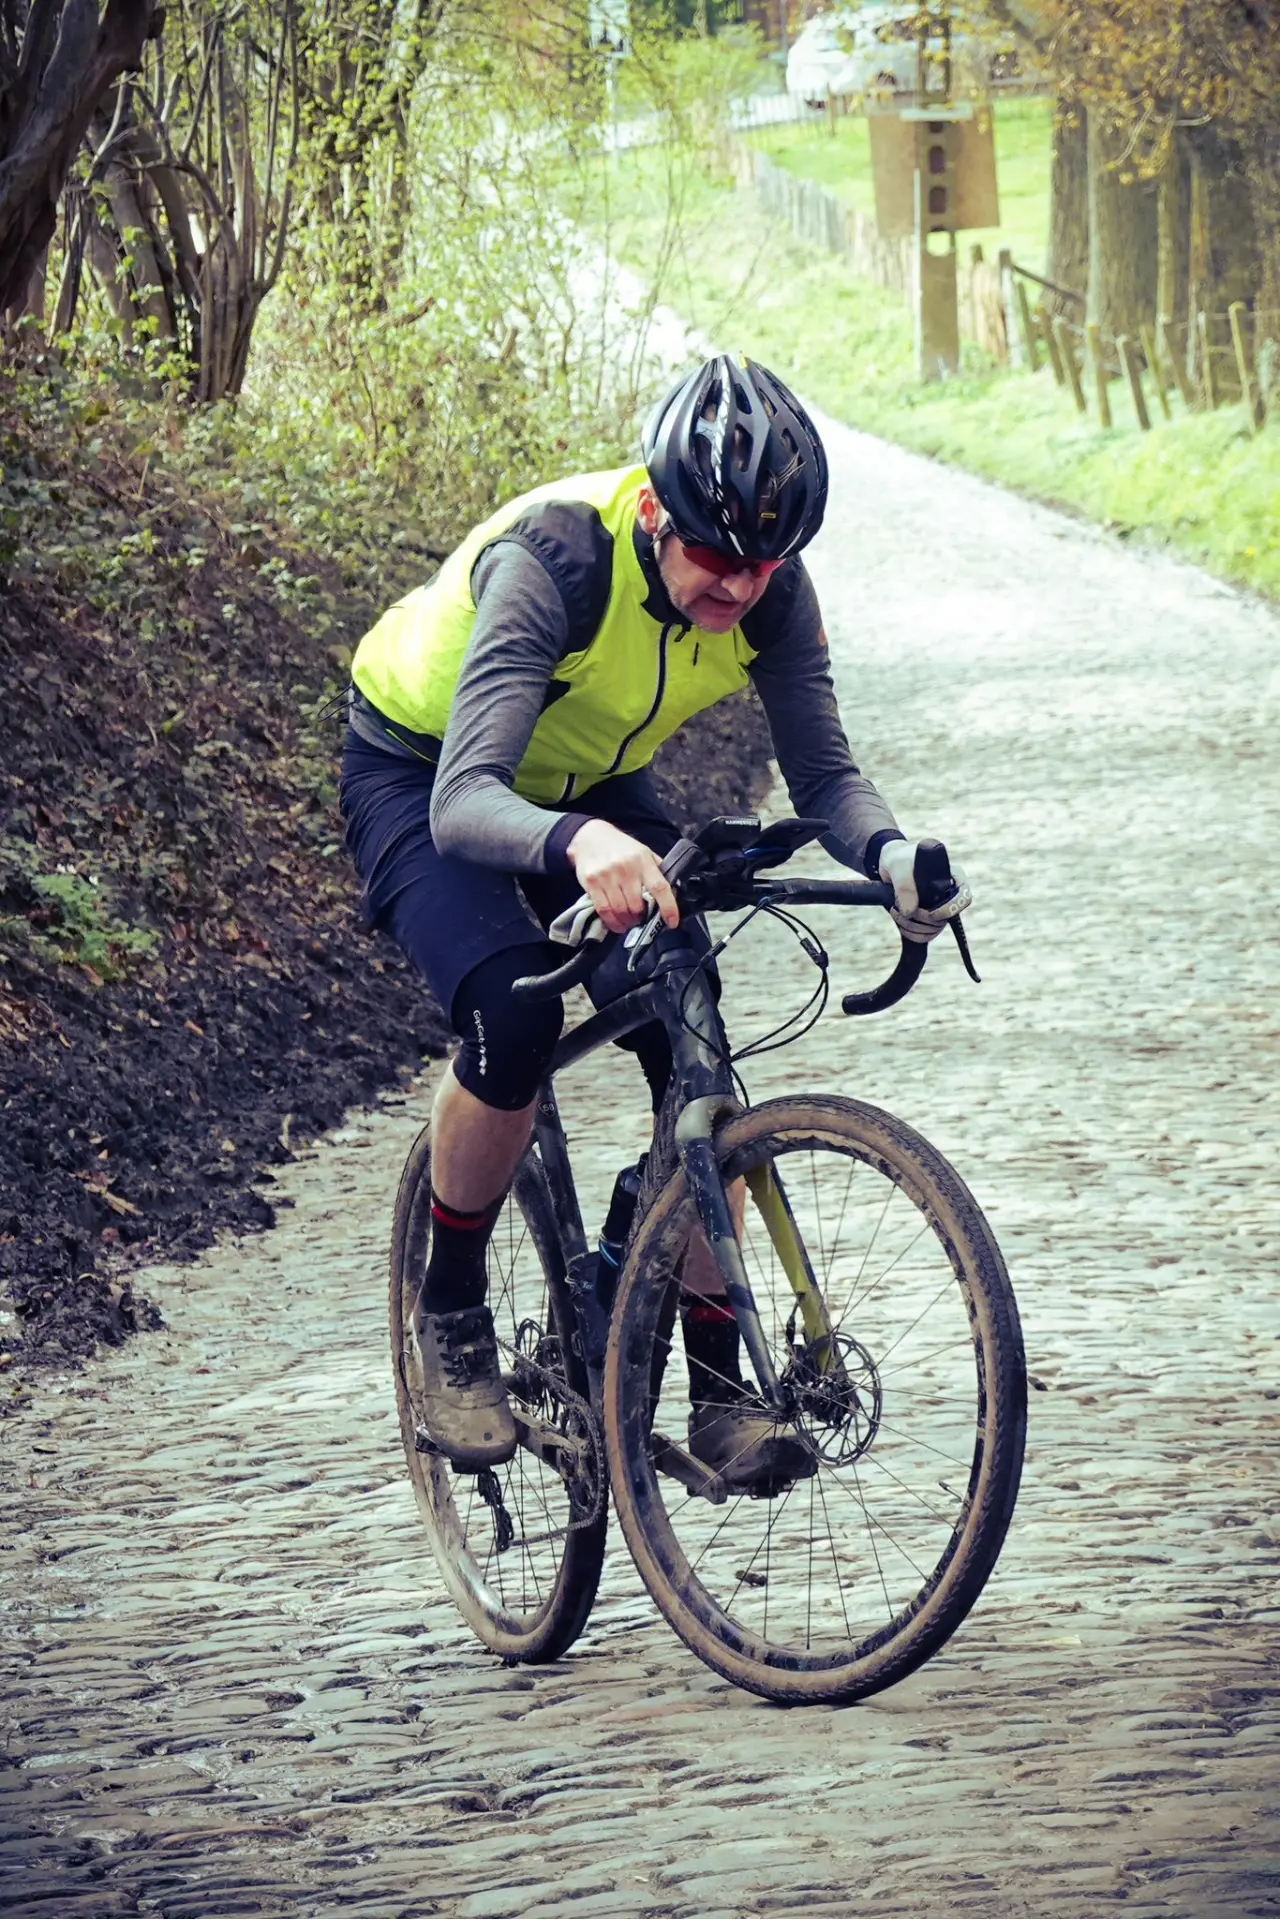 An action photo of John Kennedy riding up the Koppenberg